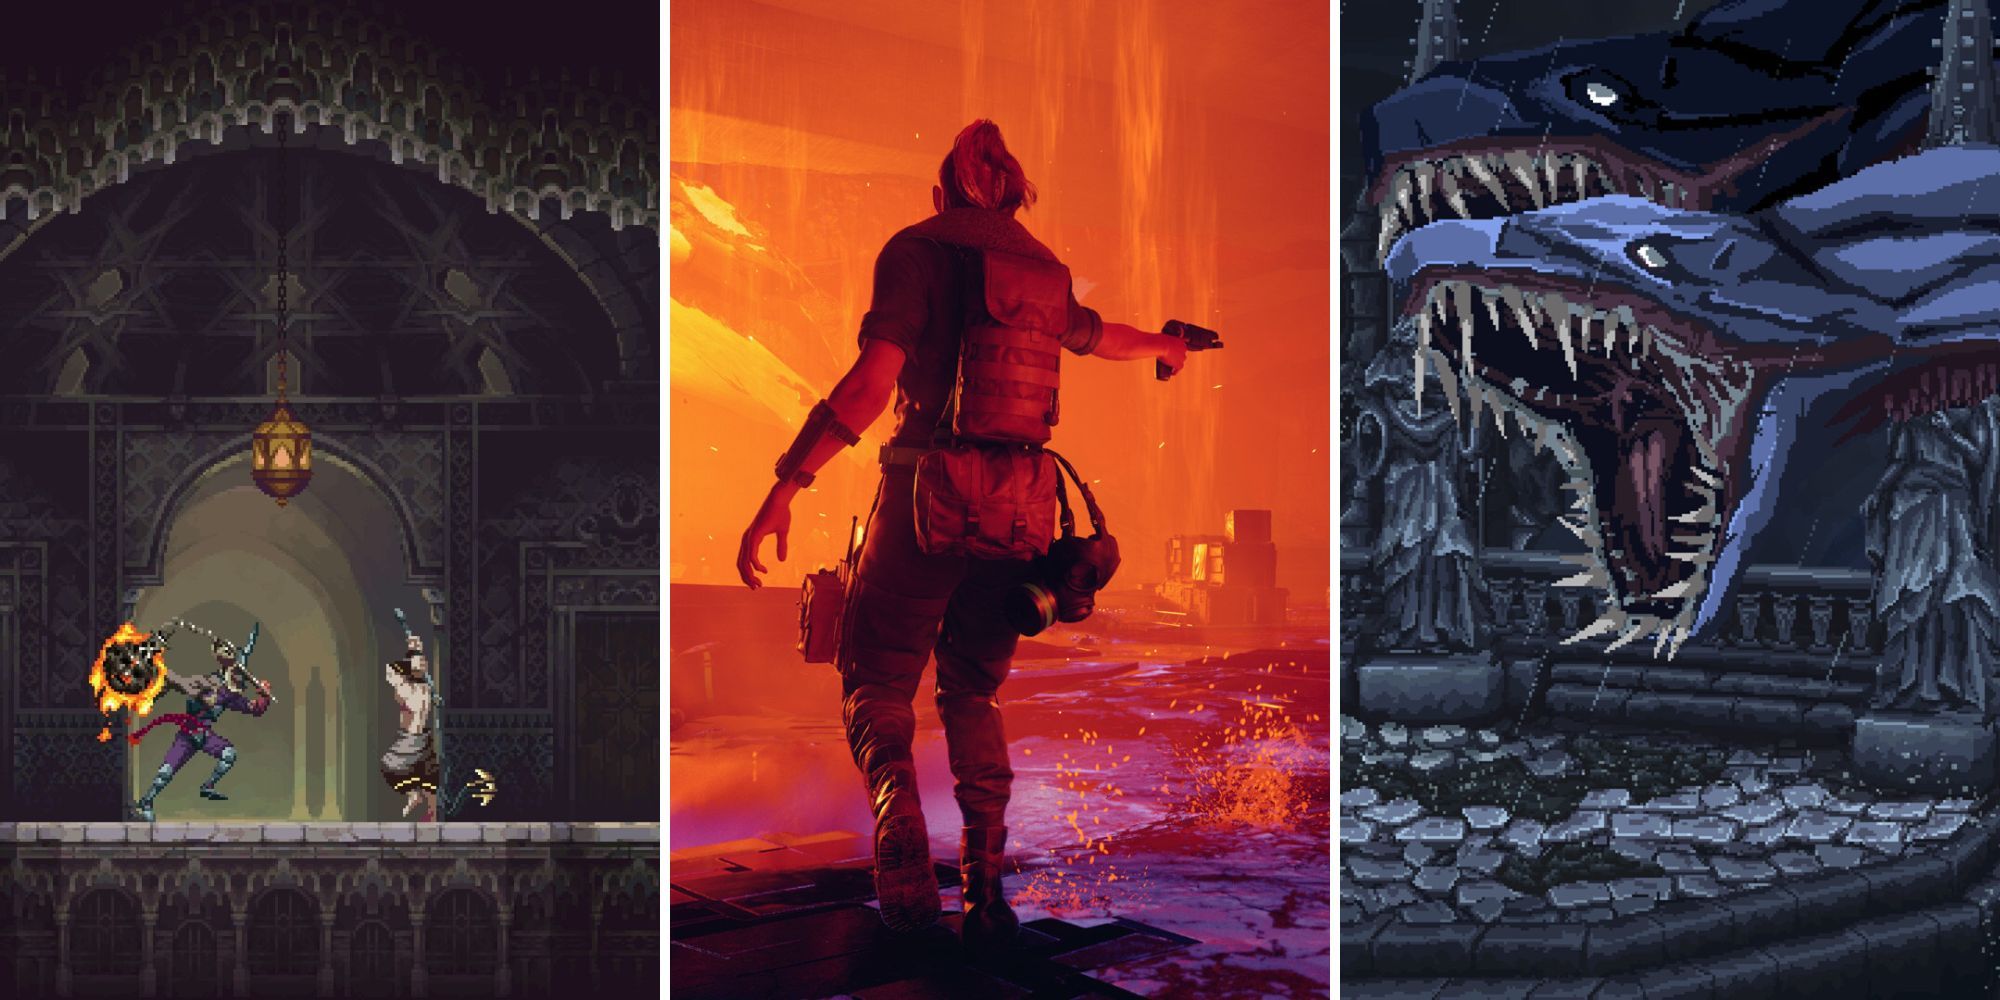 A grid showing the horror Metroidvania games Blasphemous 2, Control, and The Last Faith